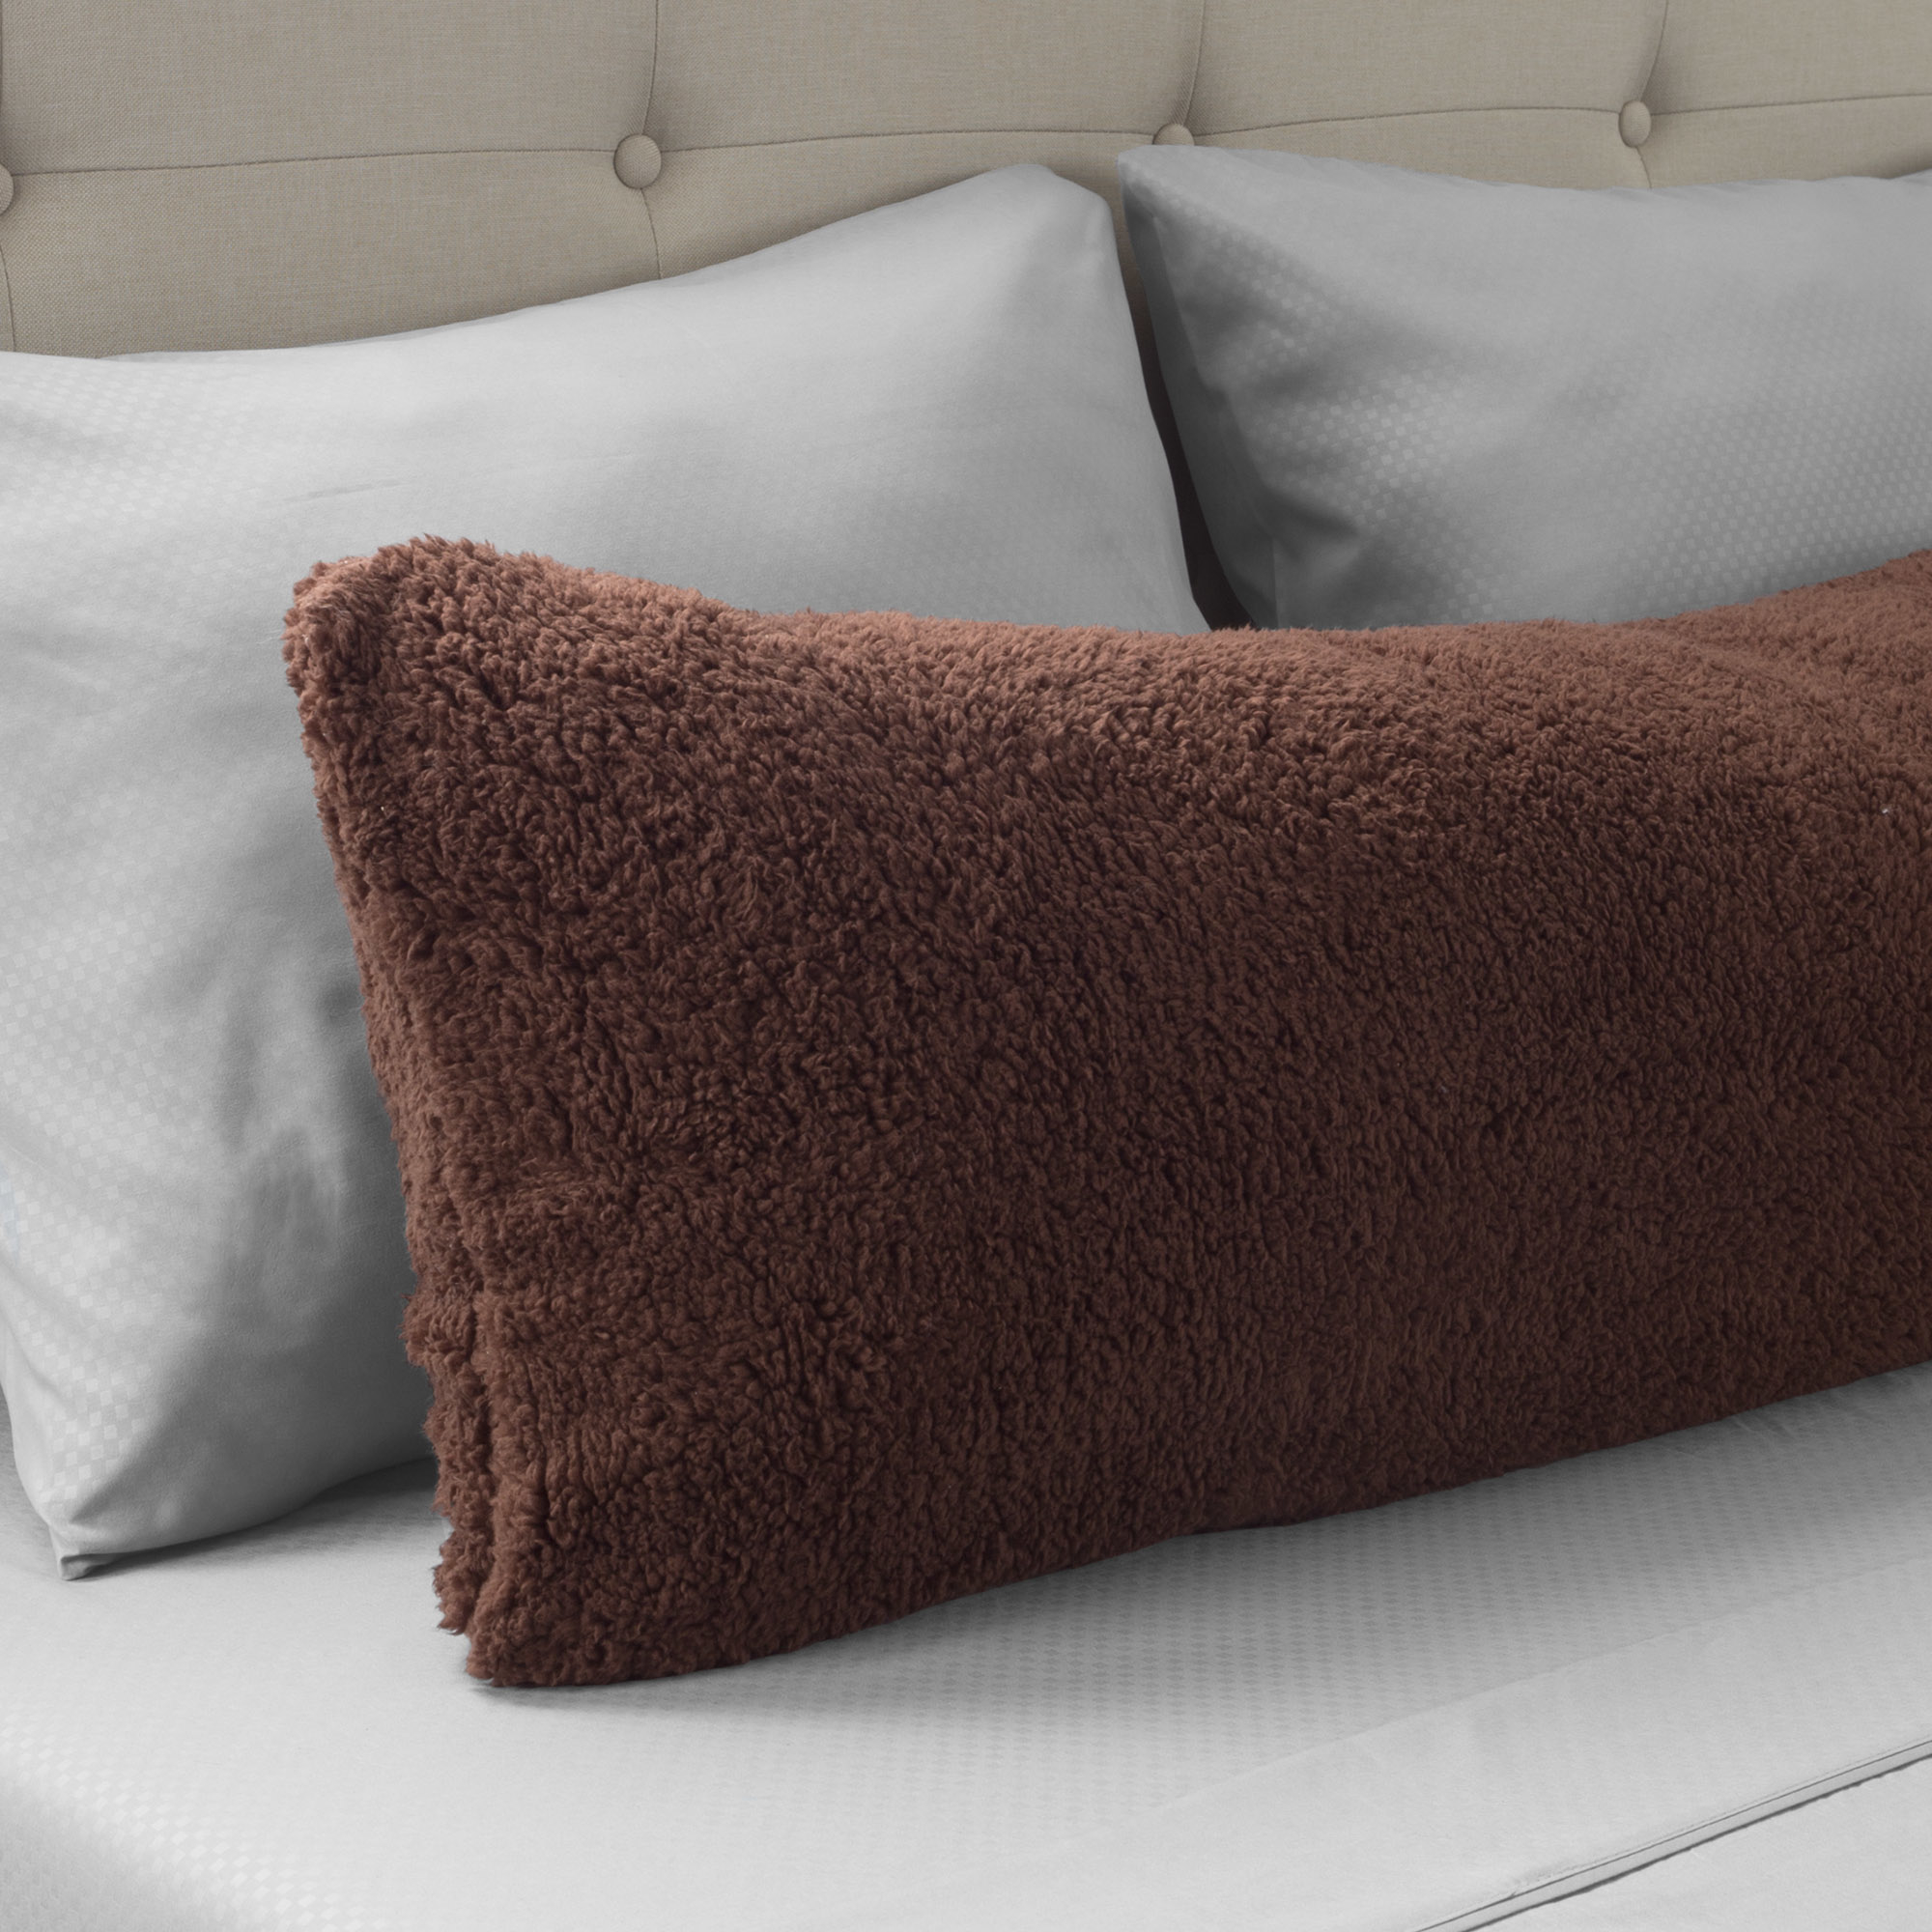 Warm Body Pillow Cover Soft Comfy Pillow Case Zippered Washable 52 X 18 Inches Brown